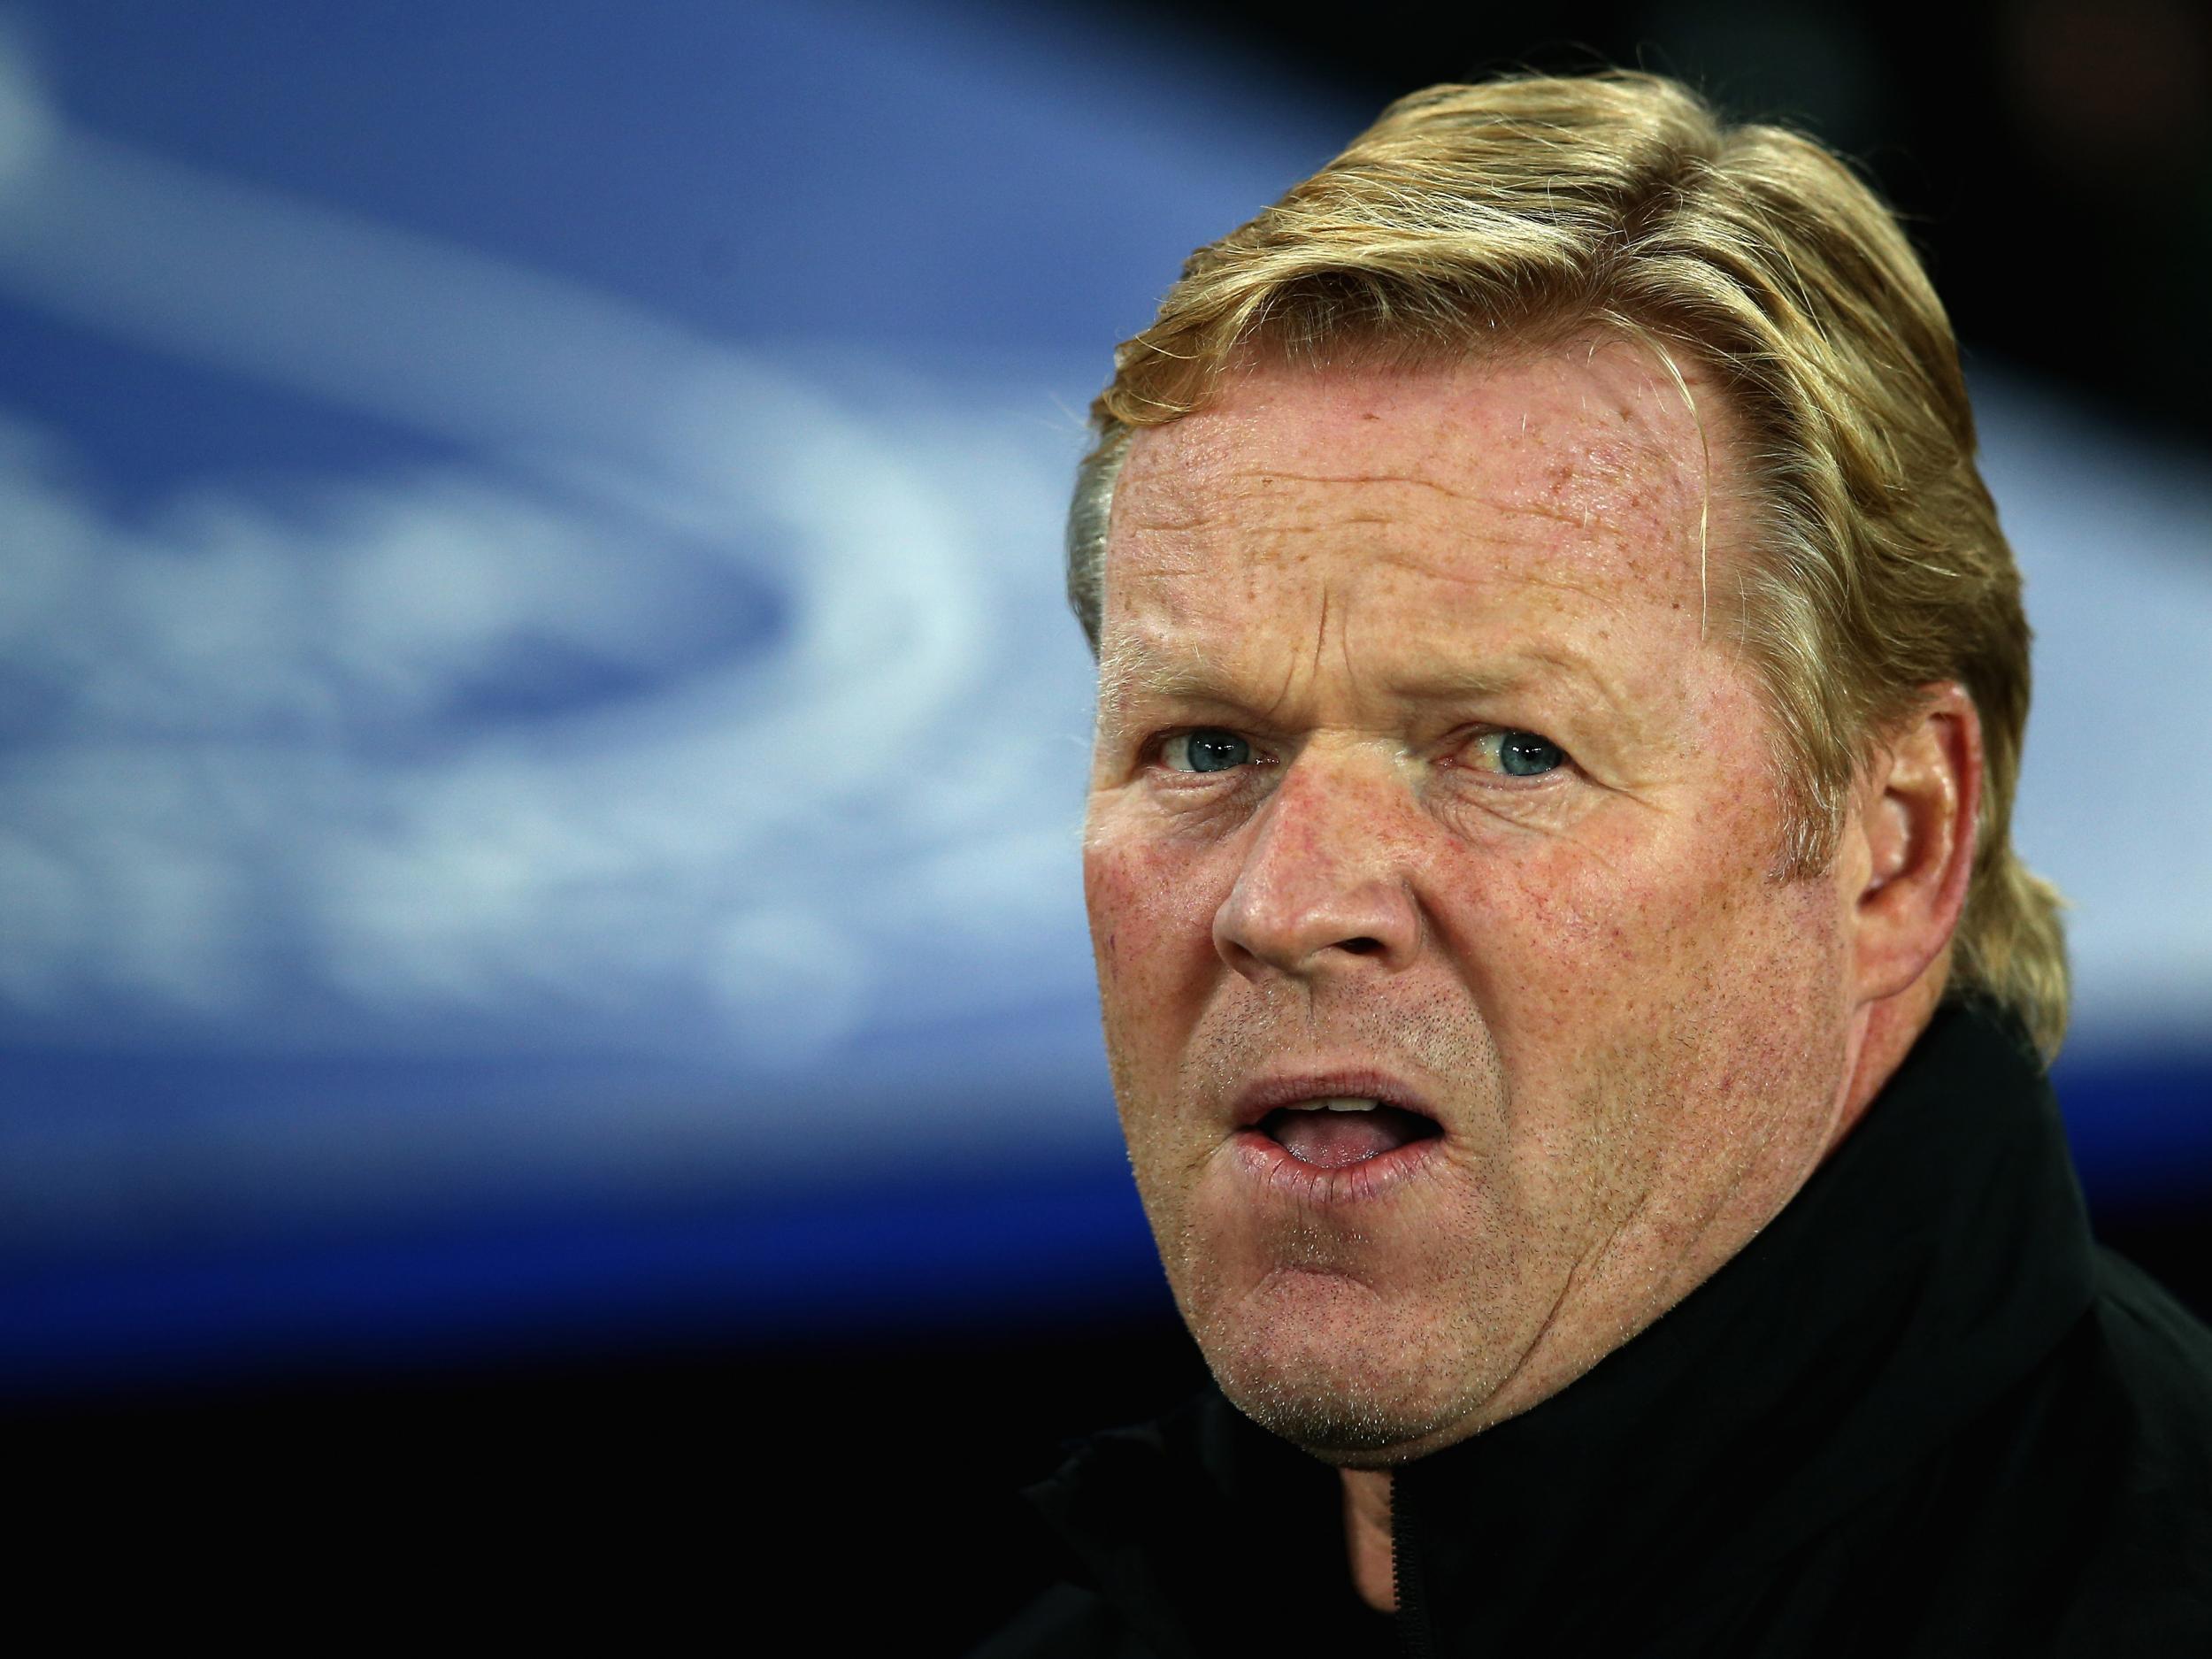 &#13;
The pressure is on for Koeman at Goodison Park &#13;